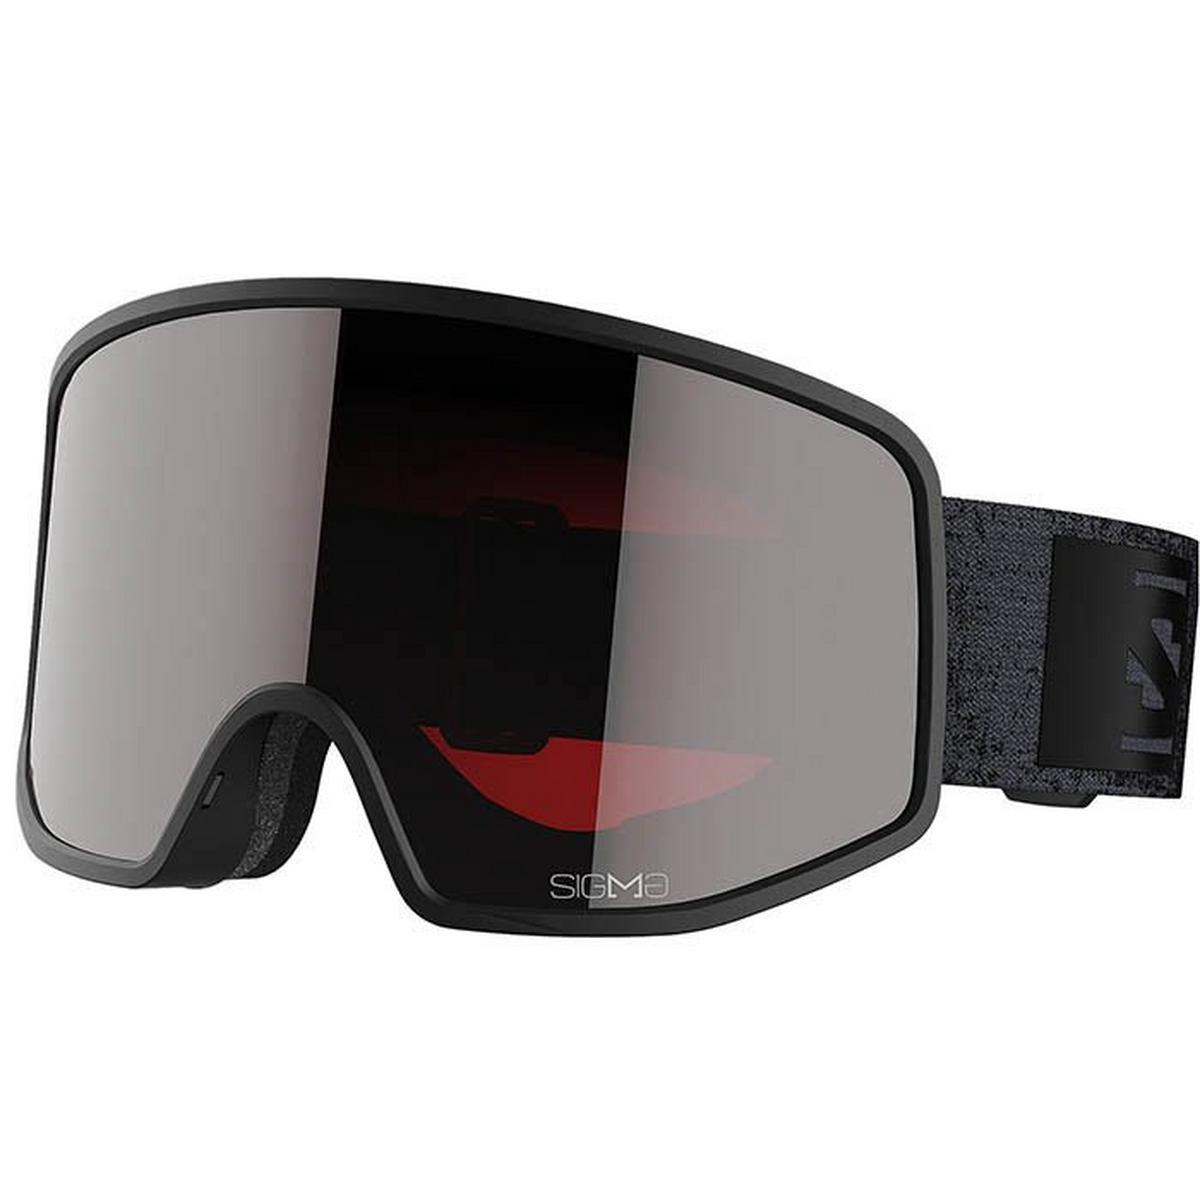 Sentry Pro Sigma Snow Goggle with Extra Lens